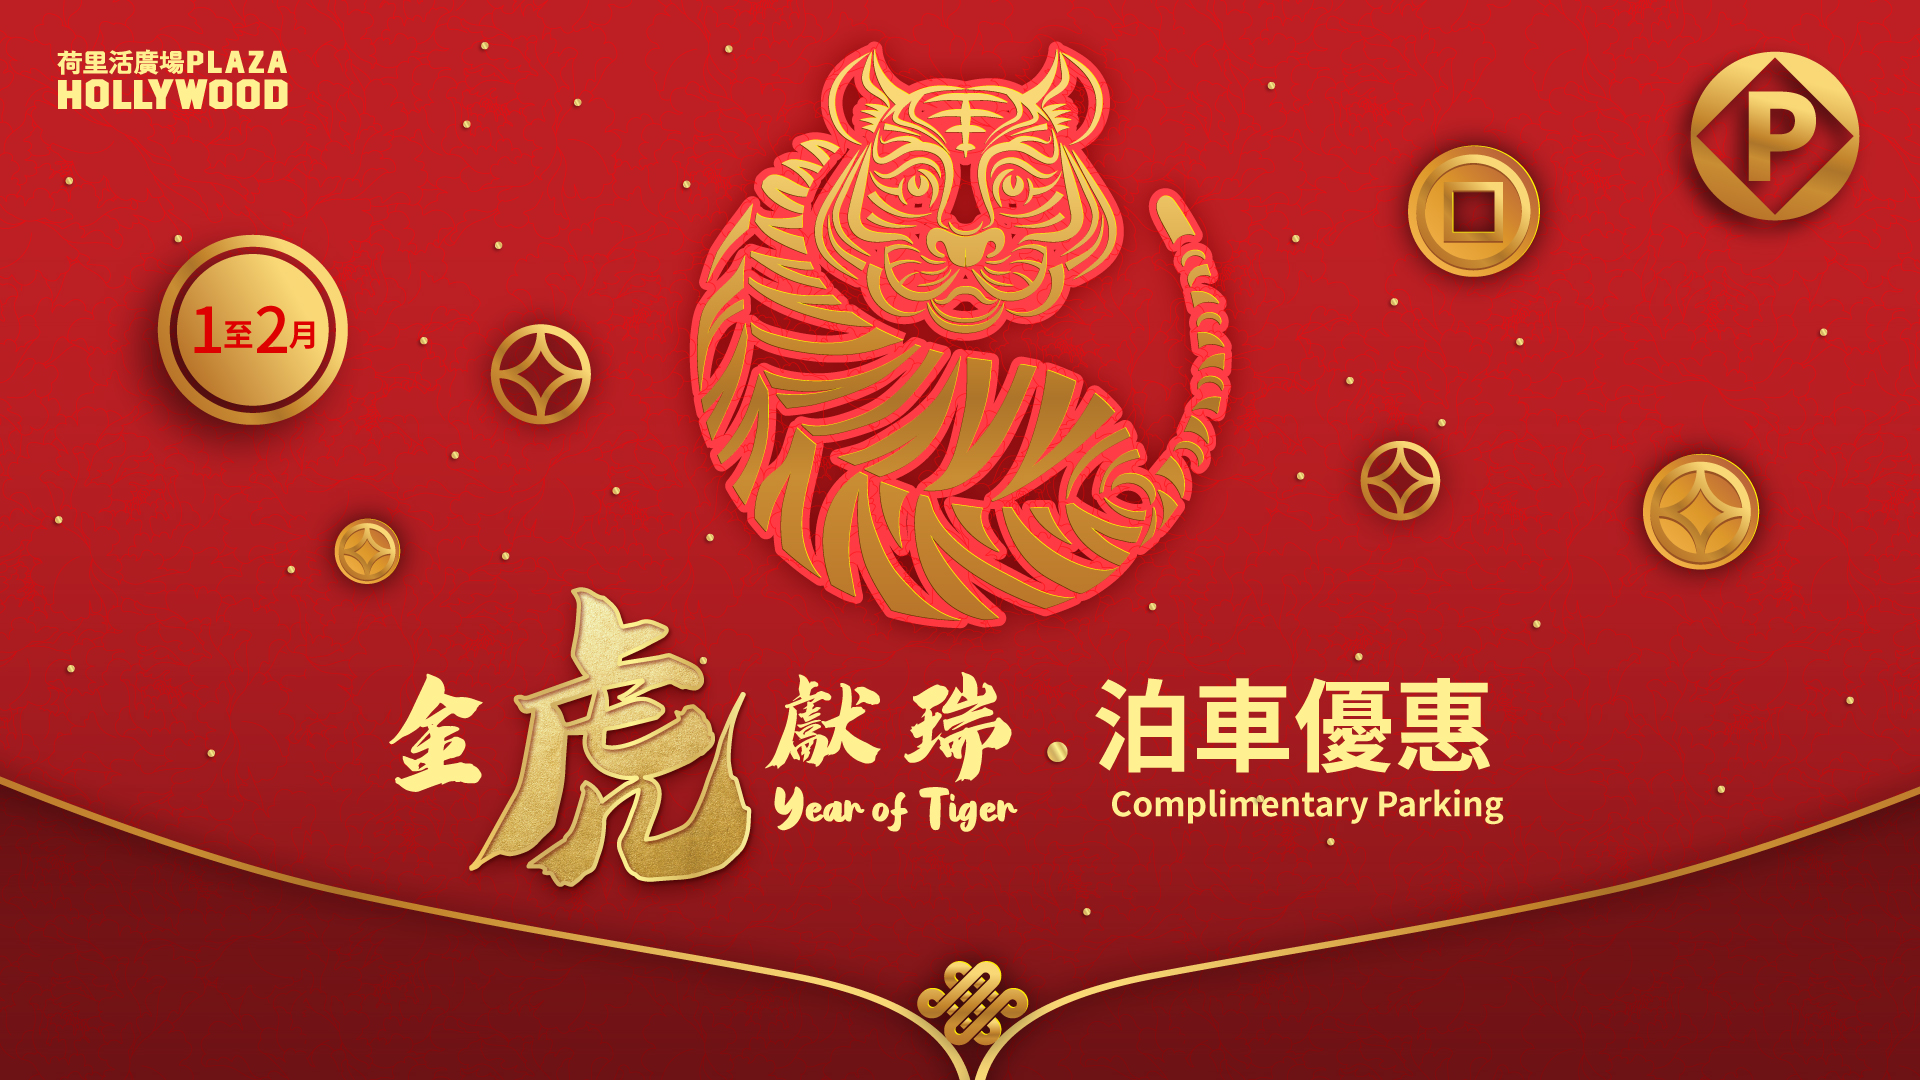 Parking offers "Year of Tiger" Complimentary Parking